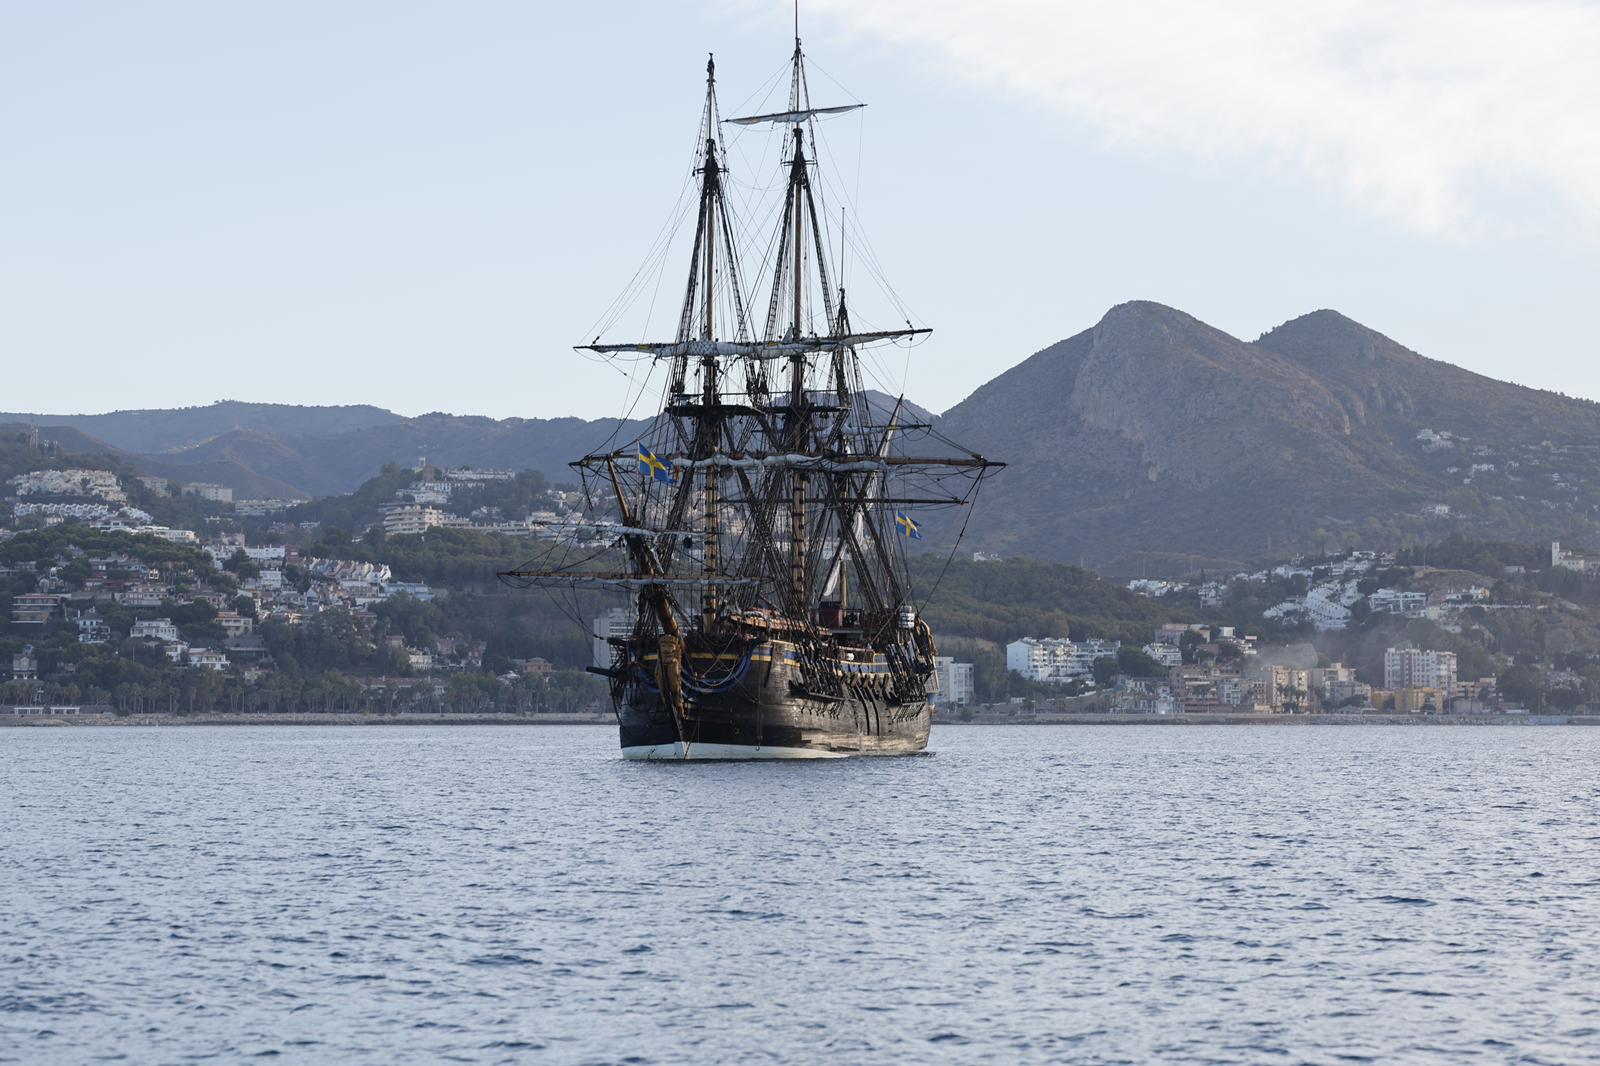 The Götheborg, the world's largest ocean-going wooden sailing ship, docks in Malaga